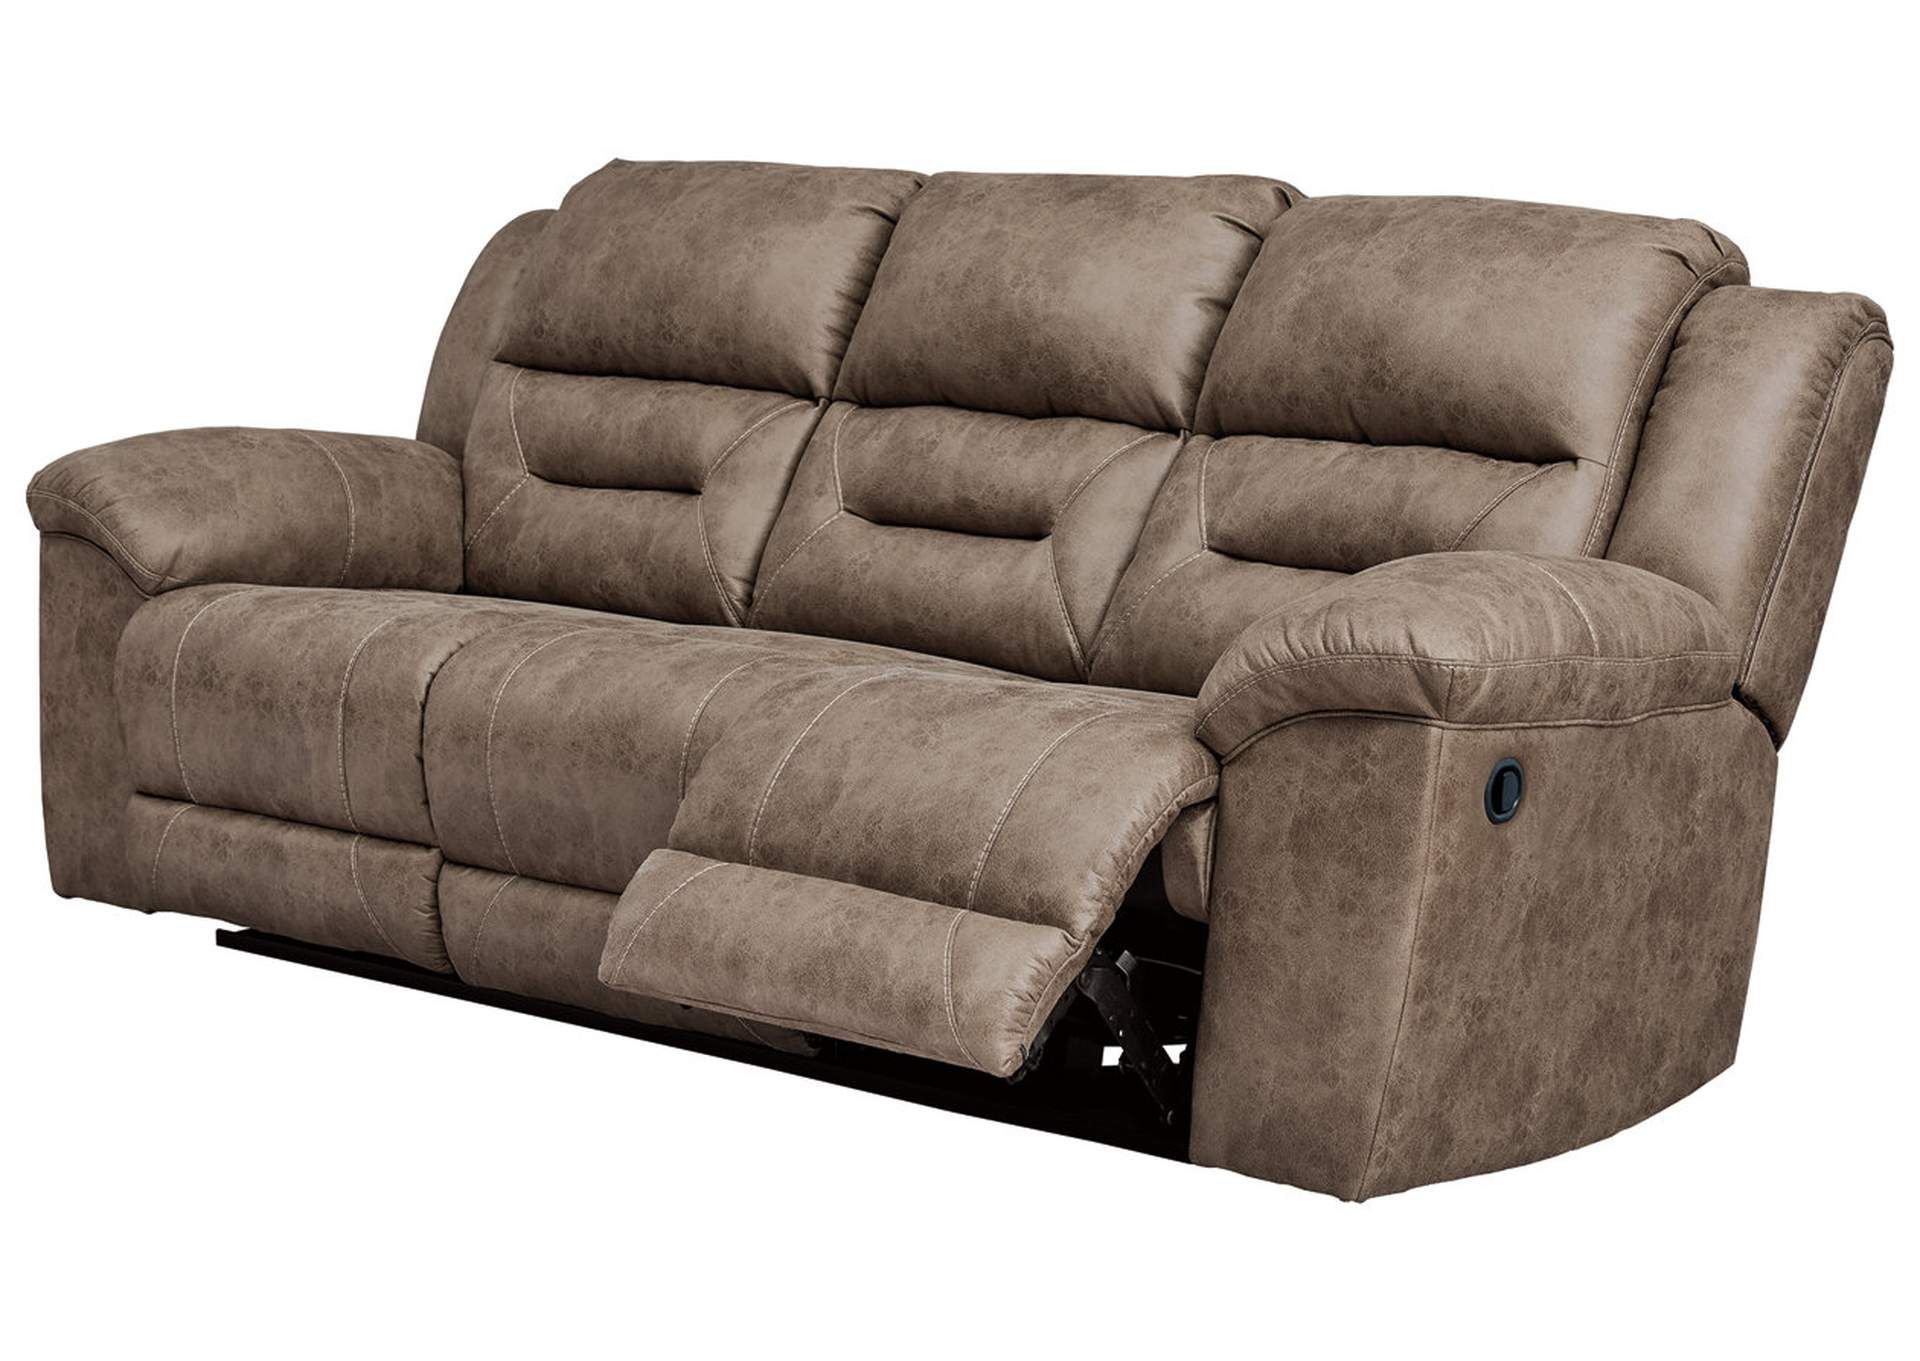 Brown/beige Stoneland Reclining Sofa Carolina Furniture Mart Throughout Most Up To Date Round Beige Faux Leather Ottomans With Pull Tab (View 2 of 10)